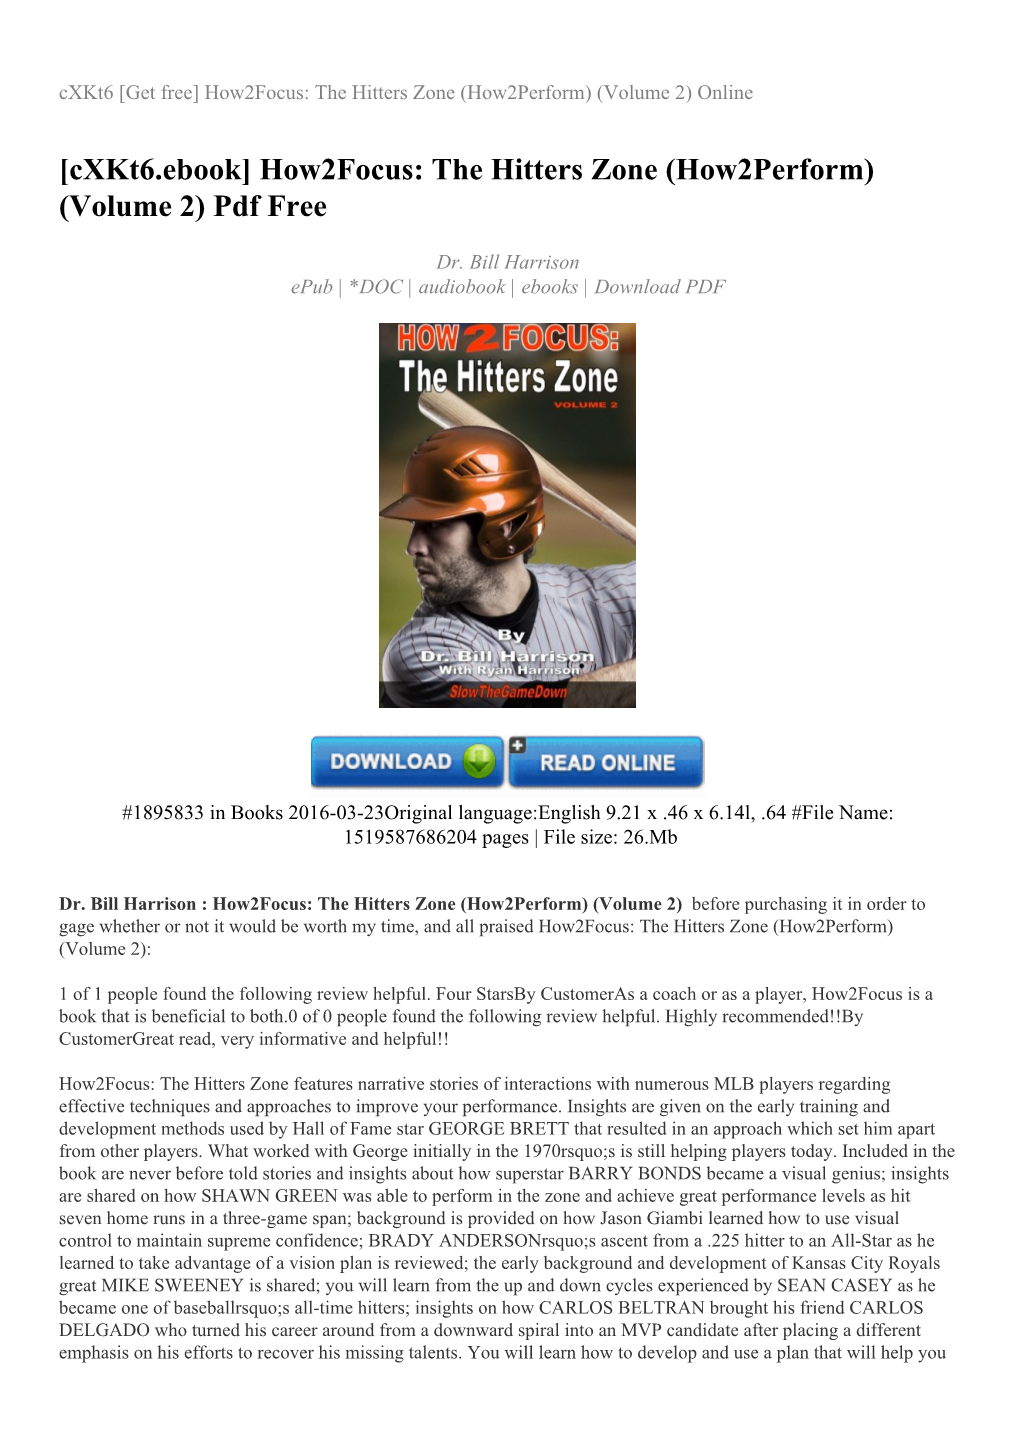 How2focus: the Hitters Zone (How2perform) (Volume 2) Online